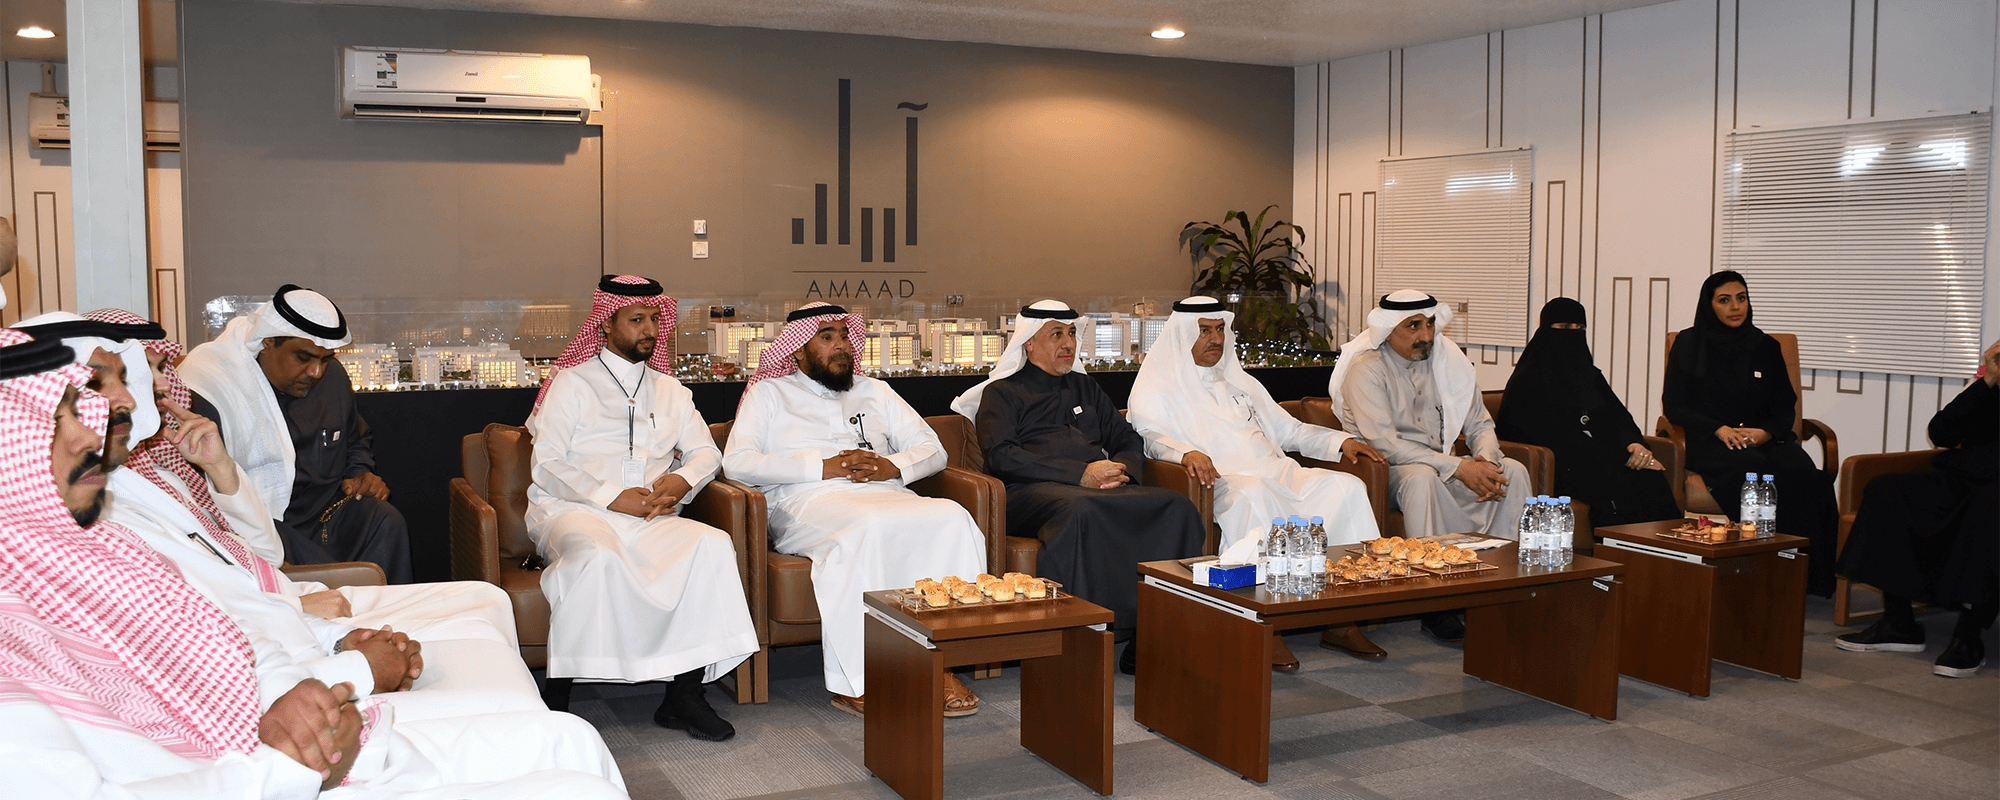 Featured image for “AMAAD Business Park hosts the General Director of the Branch of the Ministry of Human Resources and Social Development in the Eastern Province – Abdulrahman bin Fahd Al-Muqbel”